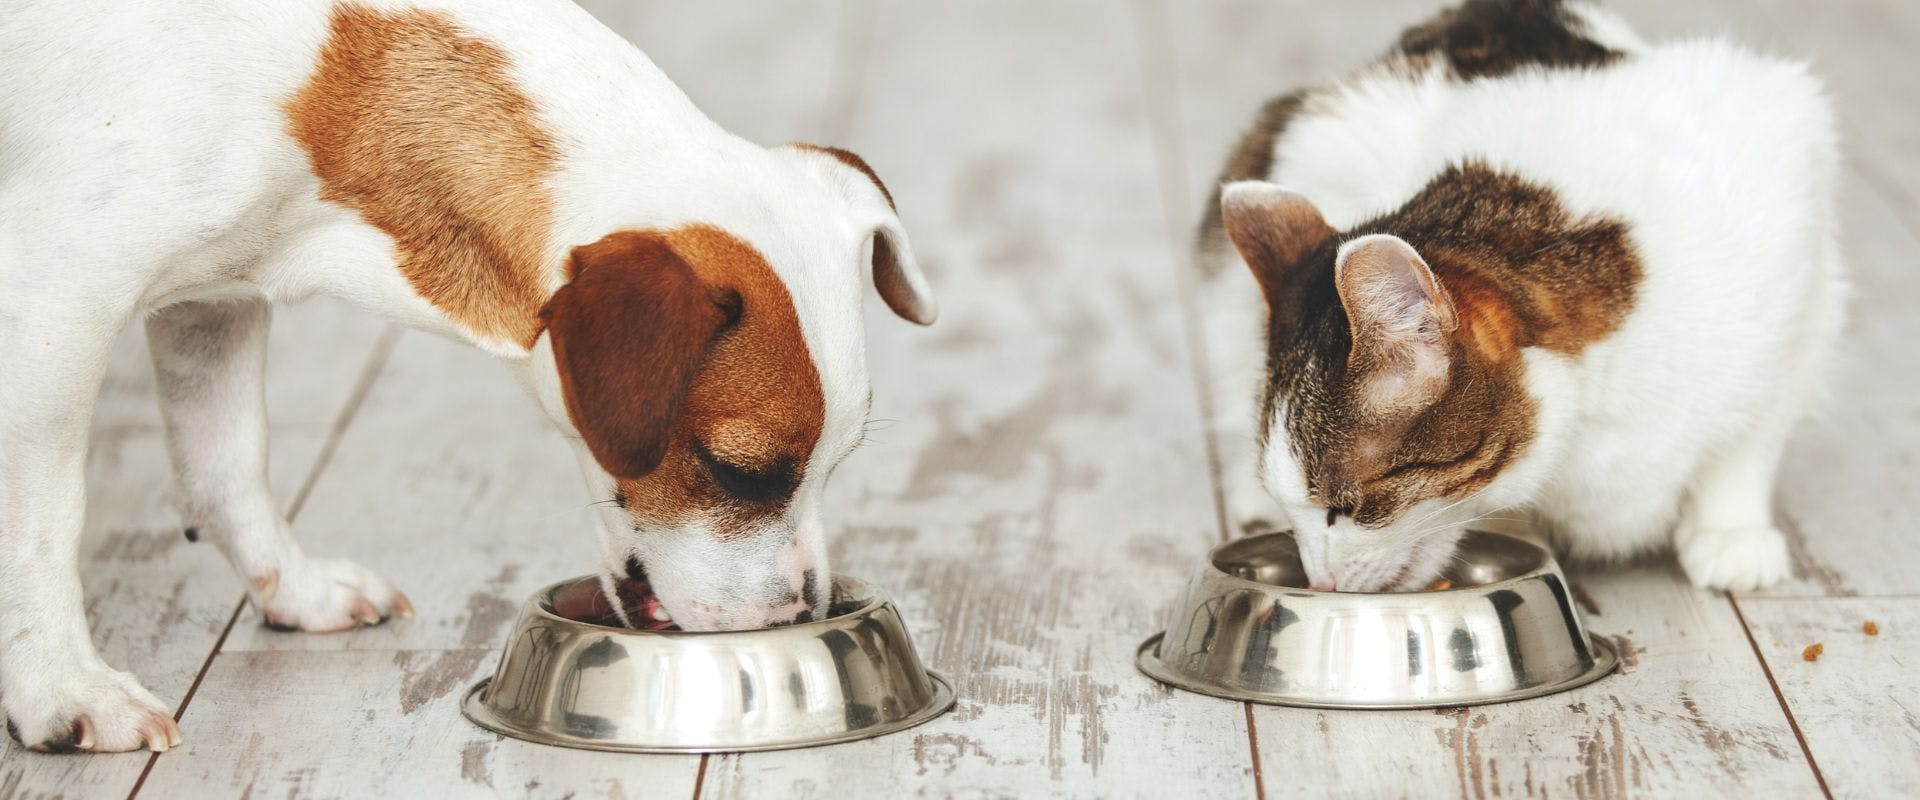 Cat and dog eating from metal food bowls